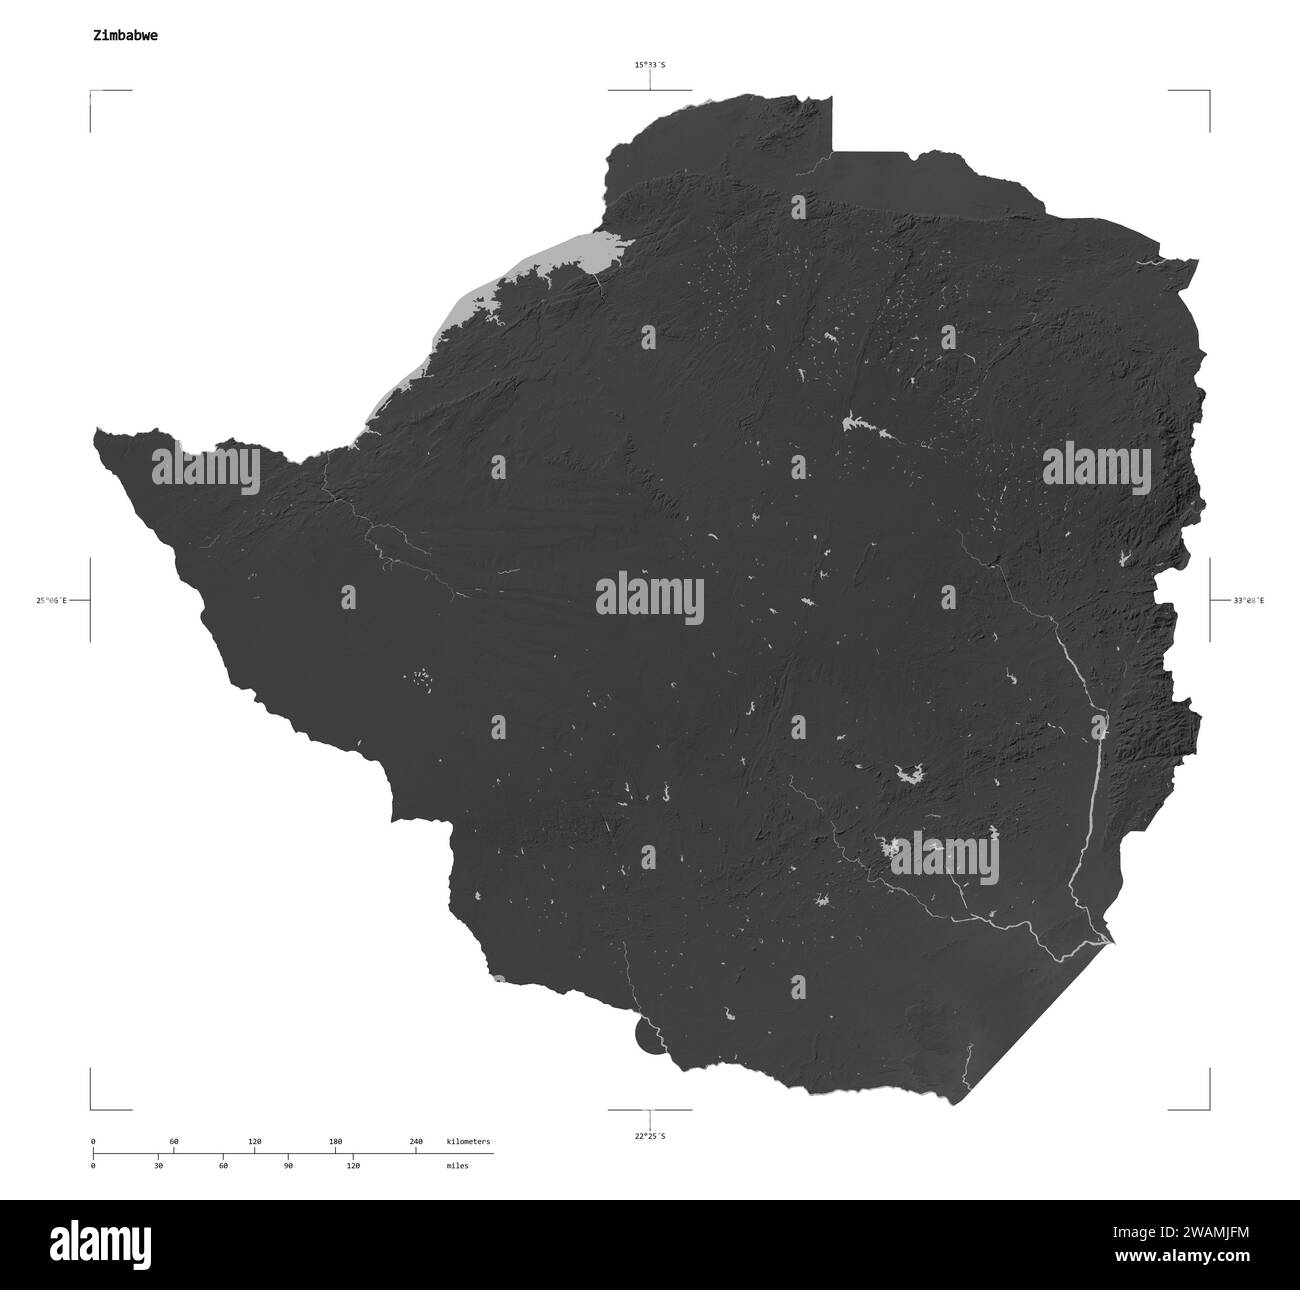 Shape of a Grayscale elevation map with lakes and rivers of the Zimbabwe, with distance scale and map border coordinates, isolated on white Stock Photo